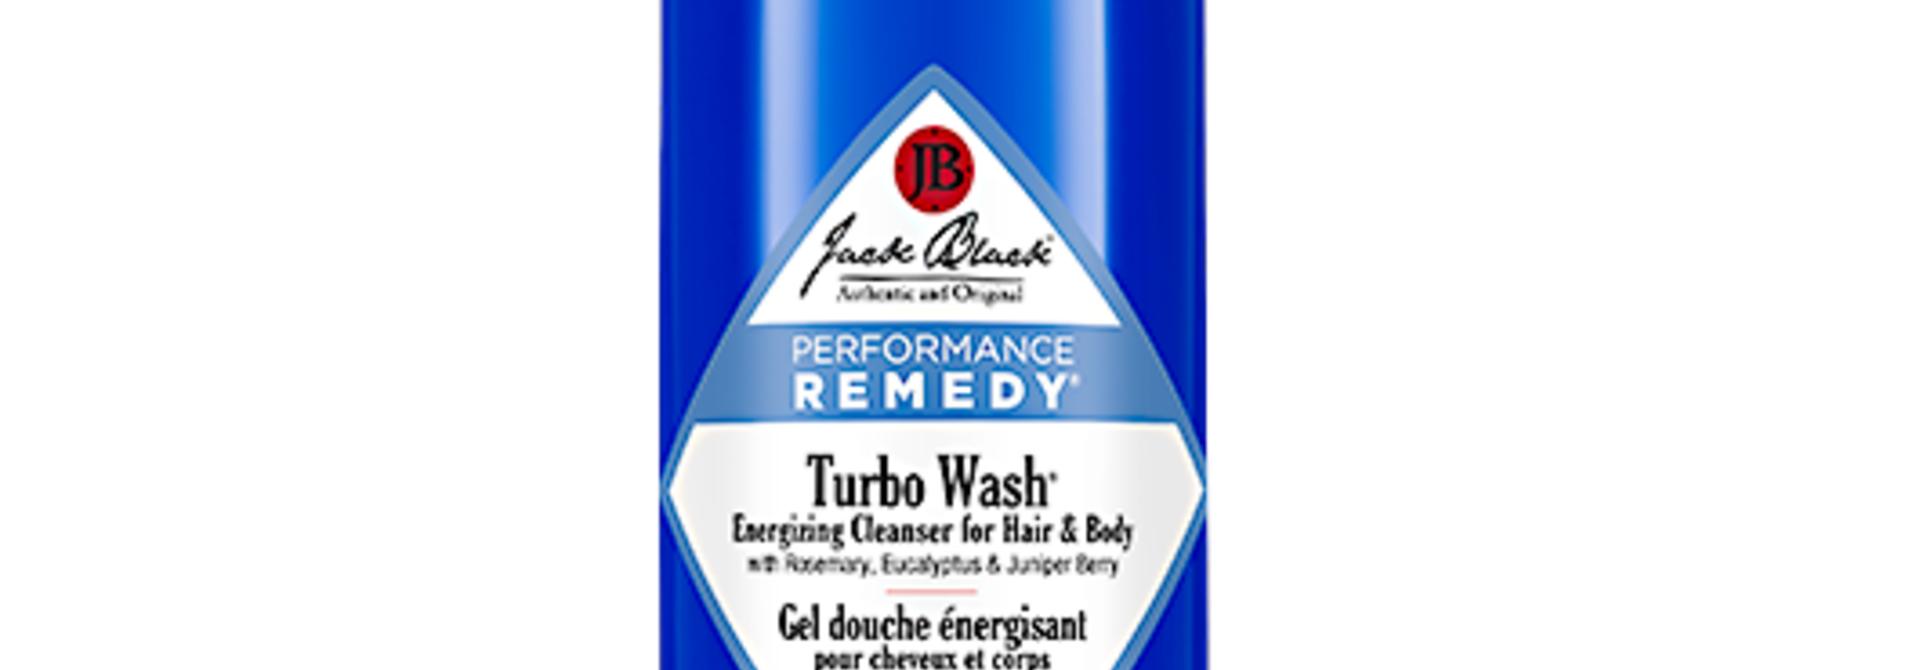 Turbo Wash Energizing Cleanser for Hair & Body  | The Performance Ready Collection